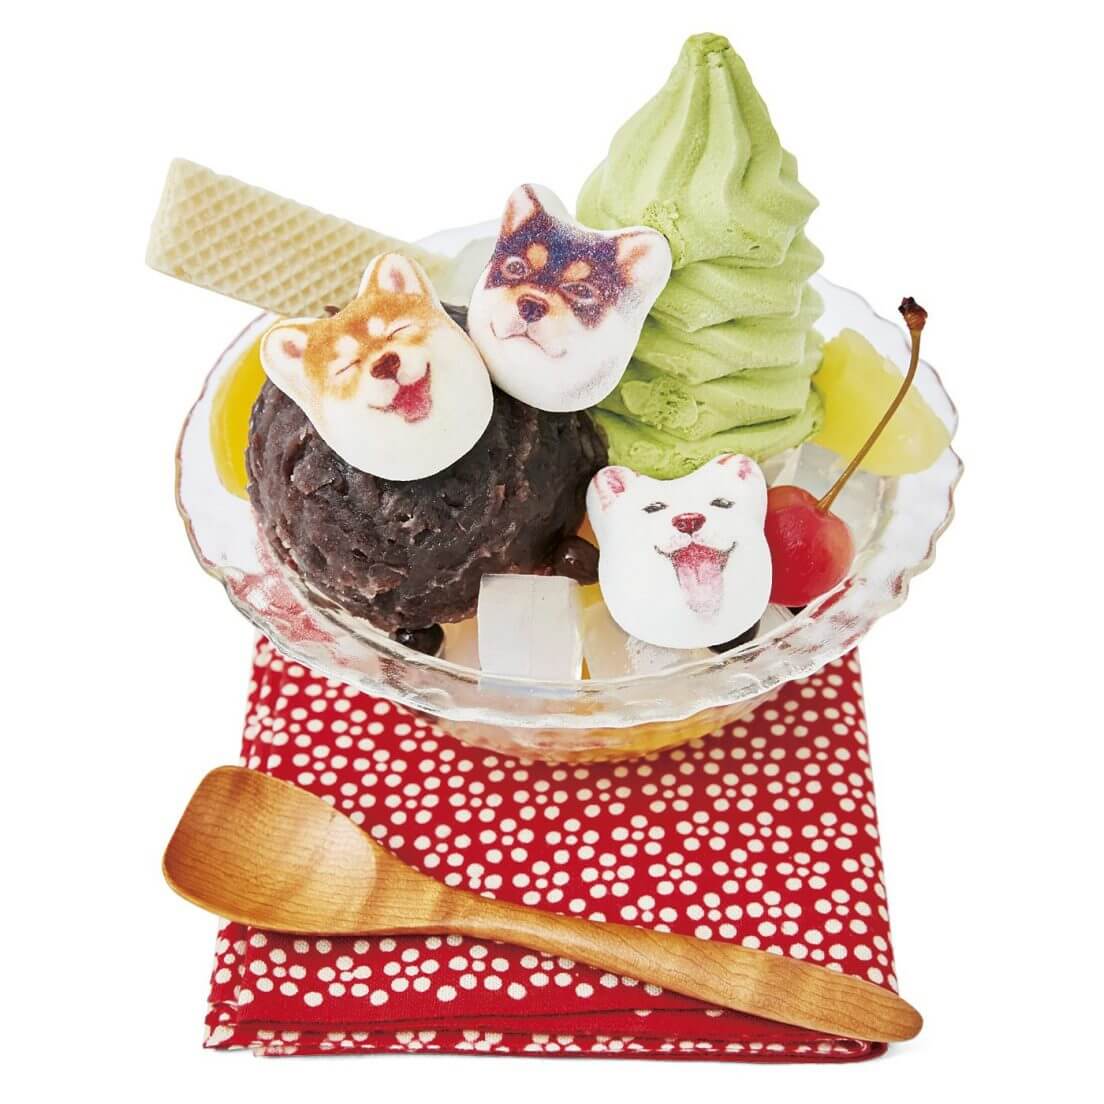 You Can Now Buy This Shiba Inu 9-Piece Marshmallow Set Online, And Lots of Other Kawaii Things! - WORLD OF BUZZ 1